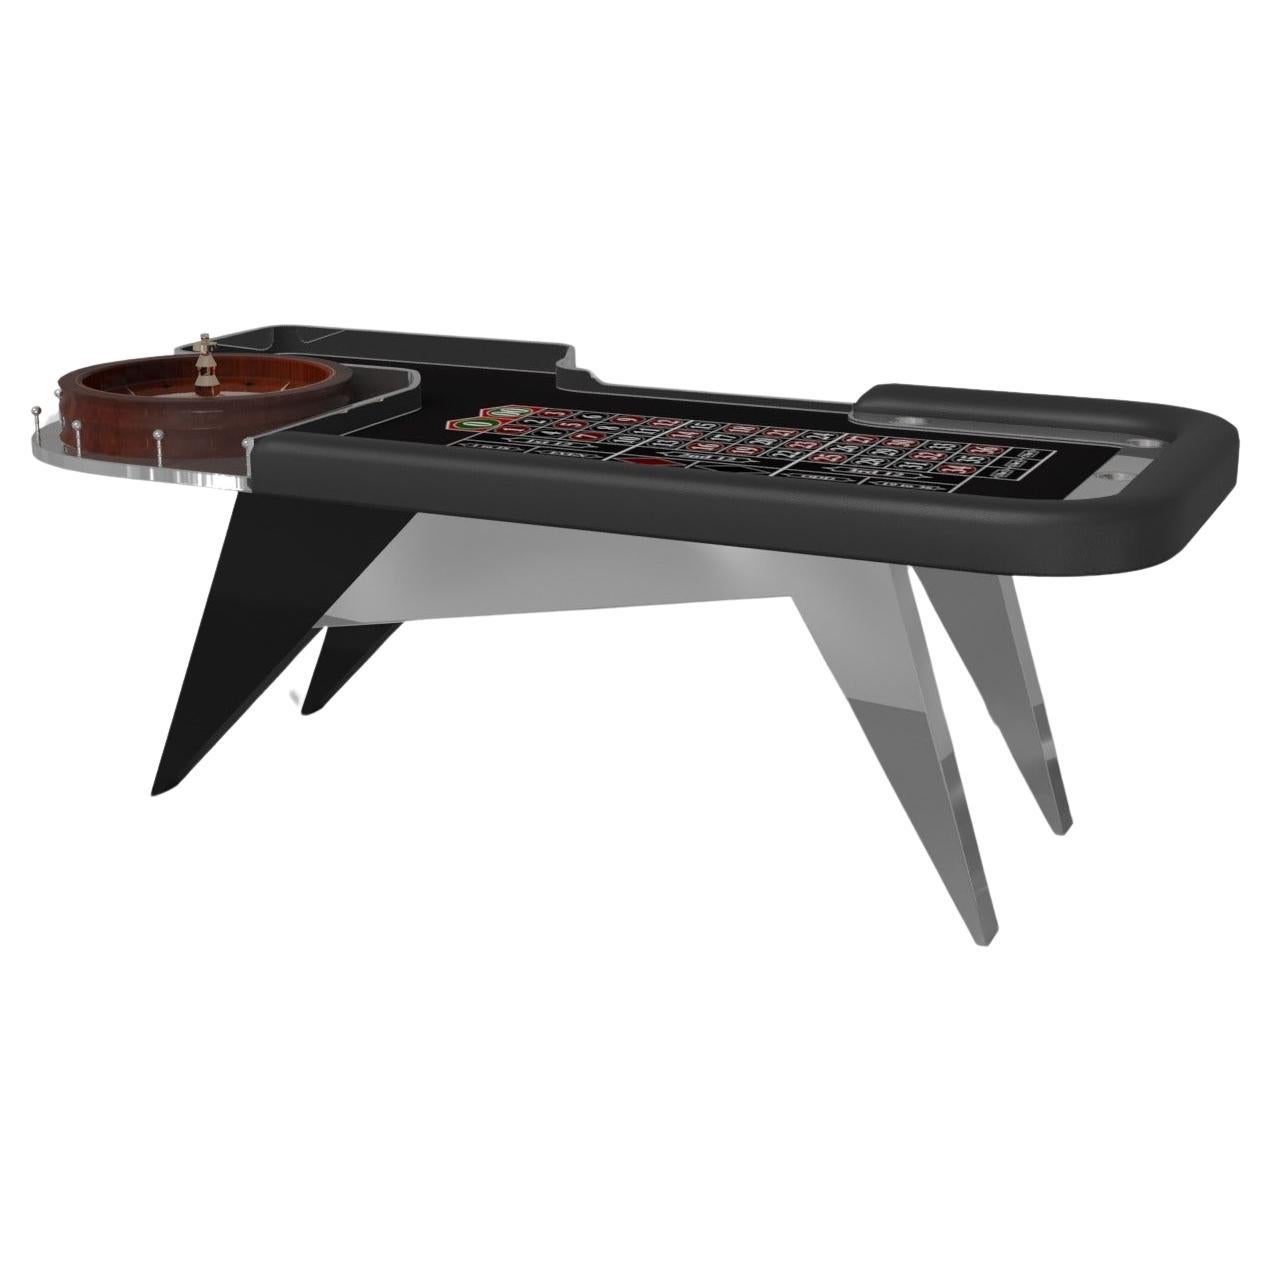 Elevate Customs Mantis Roulette Tables/Stainless Steel Sheet Metal in 8'2" -USA